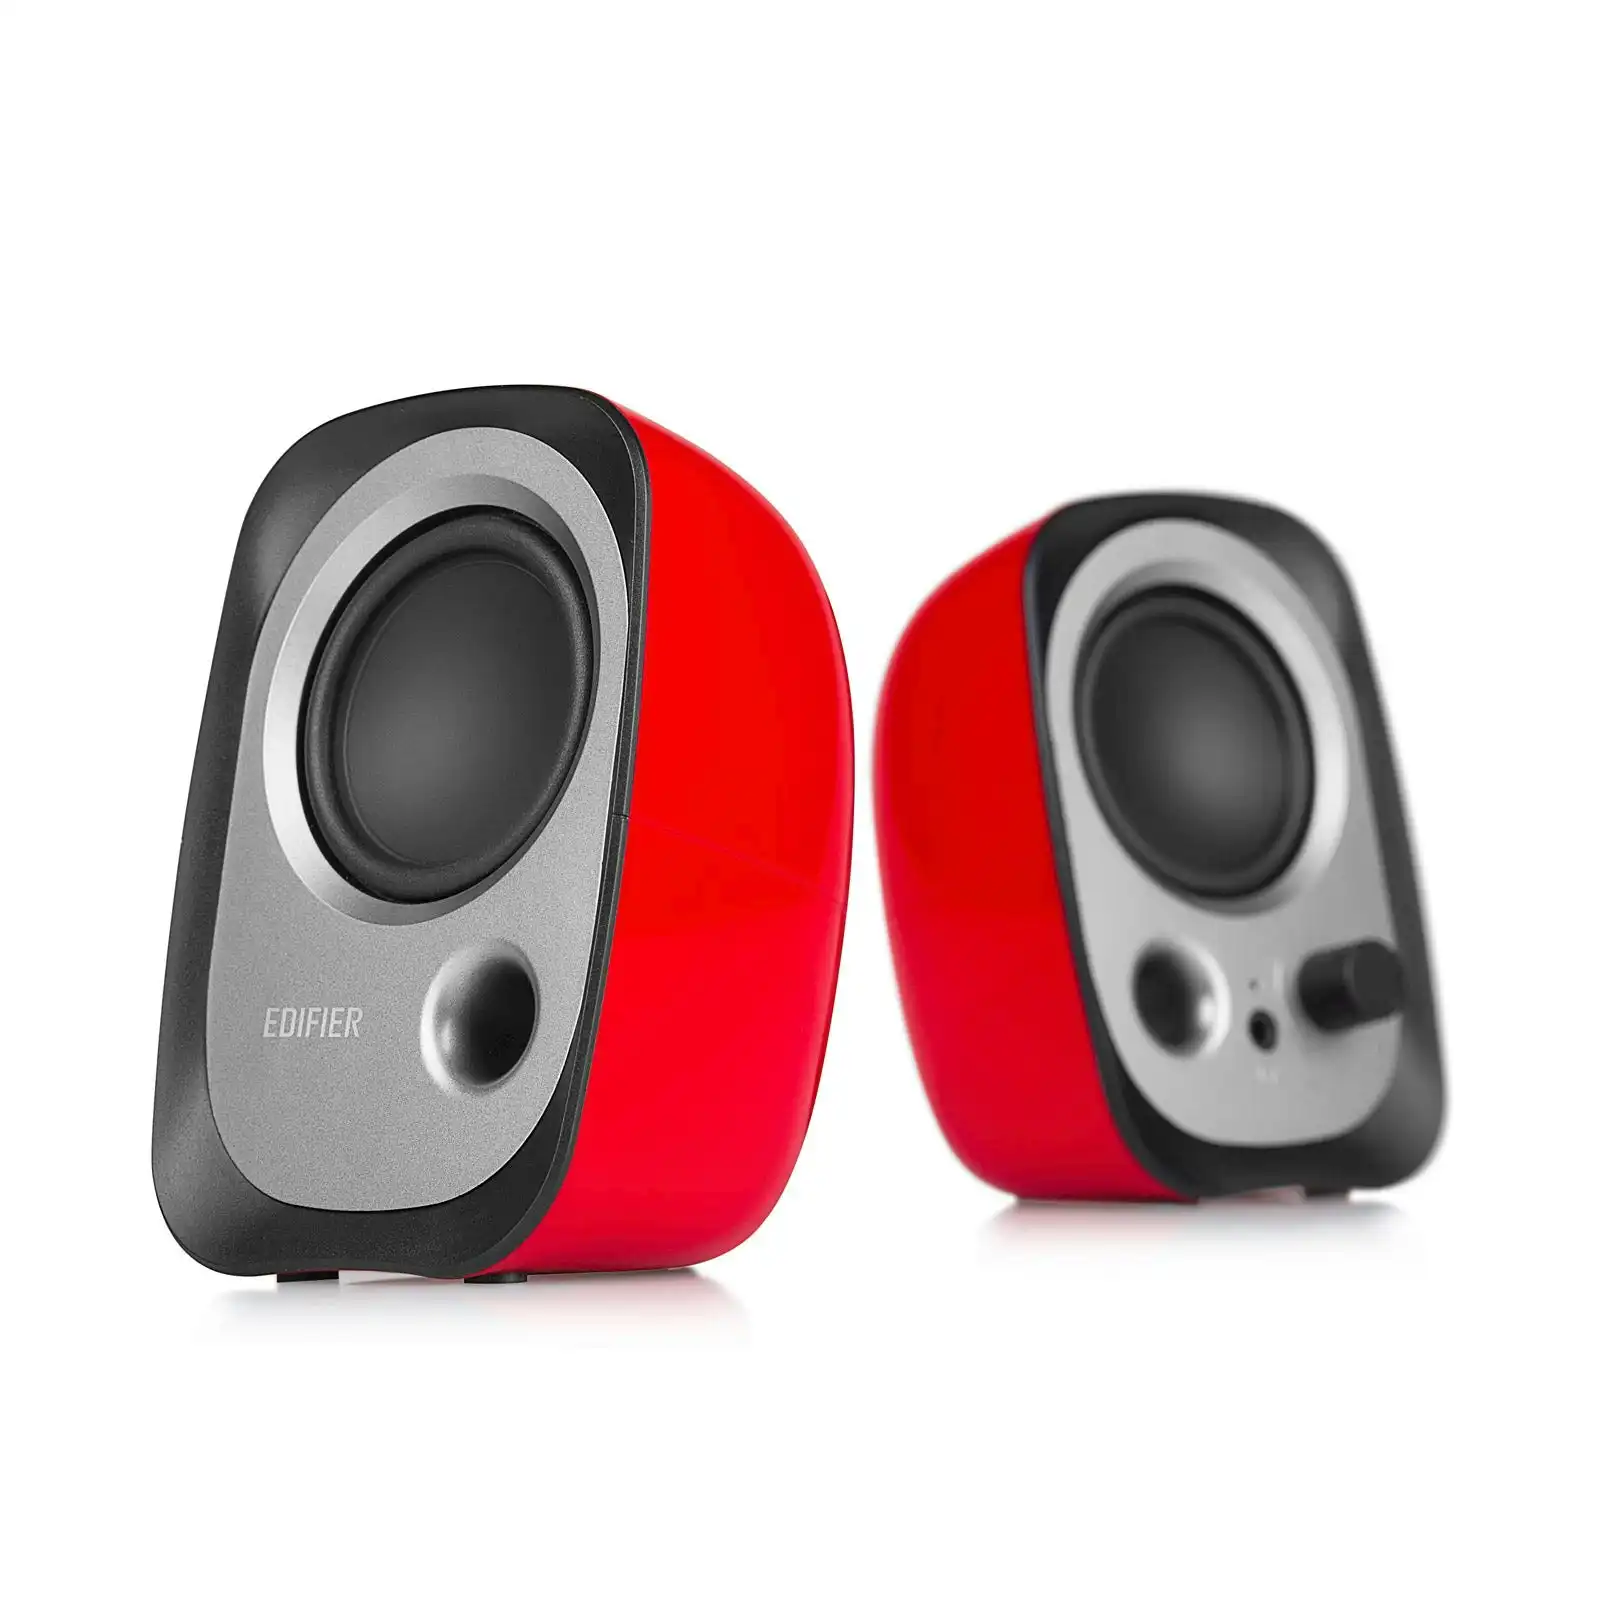 Edifier R12u Usb Compact 2.0 Multimedia Speakers System - Red